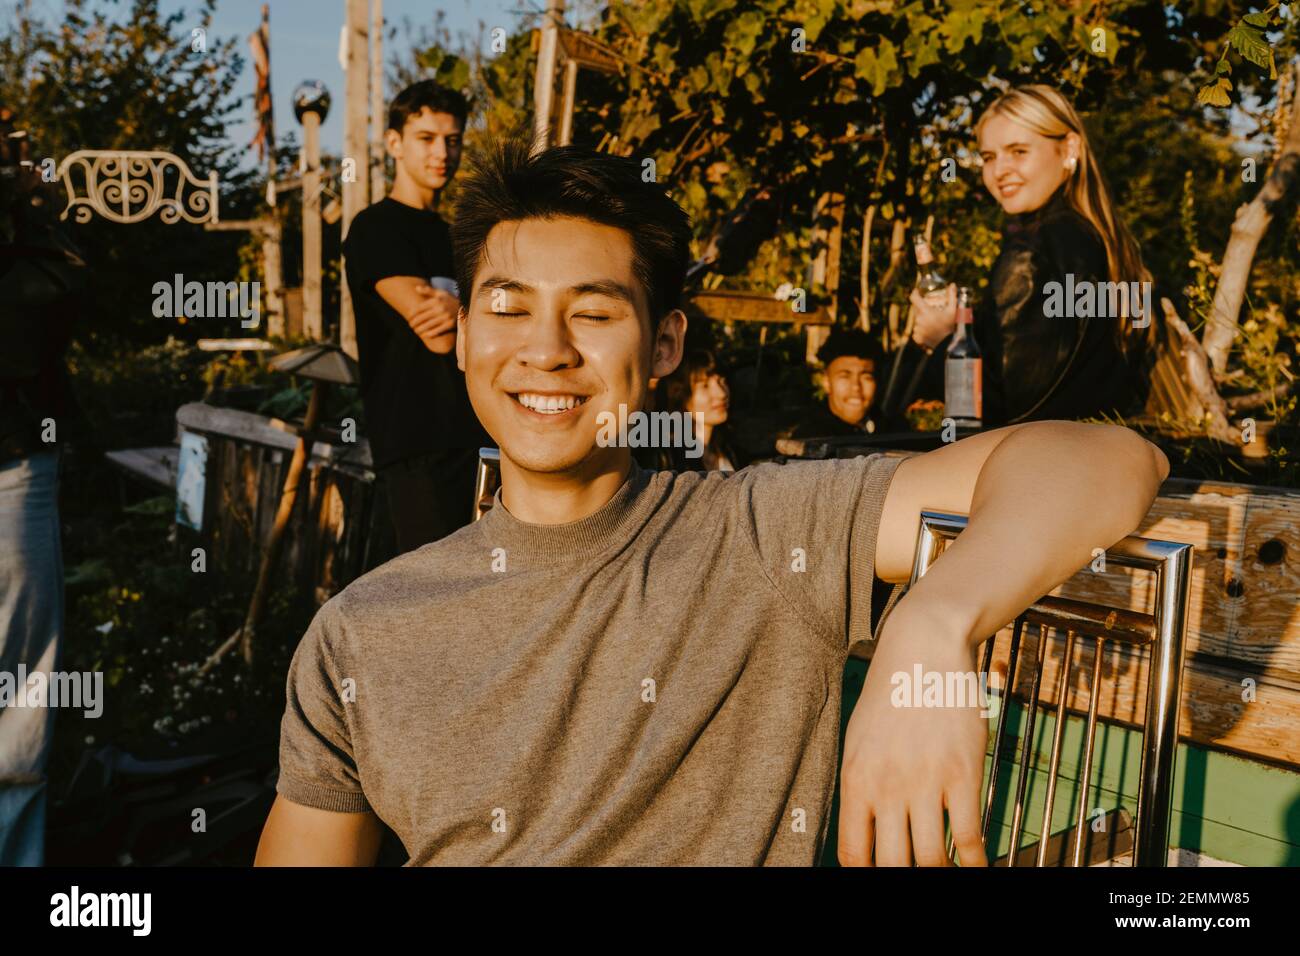 Smiling man sitting on bench while friends in background at park Stock Photo